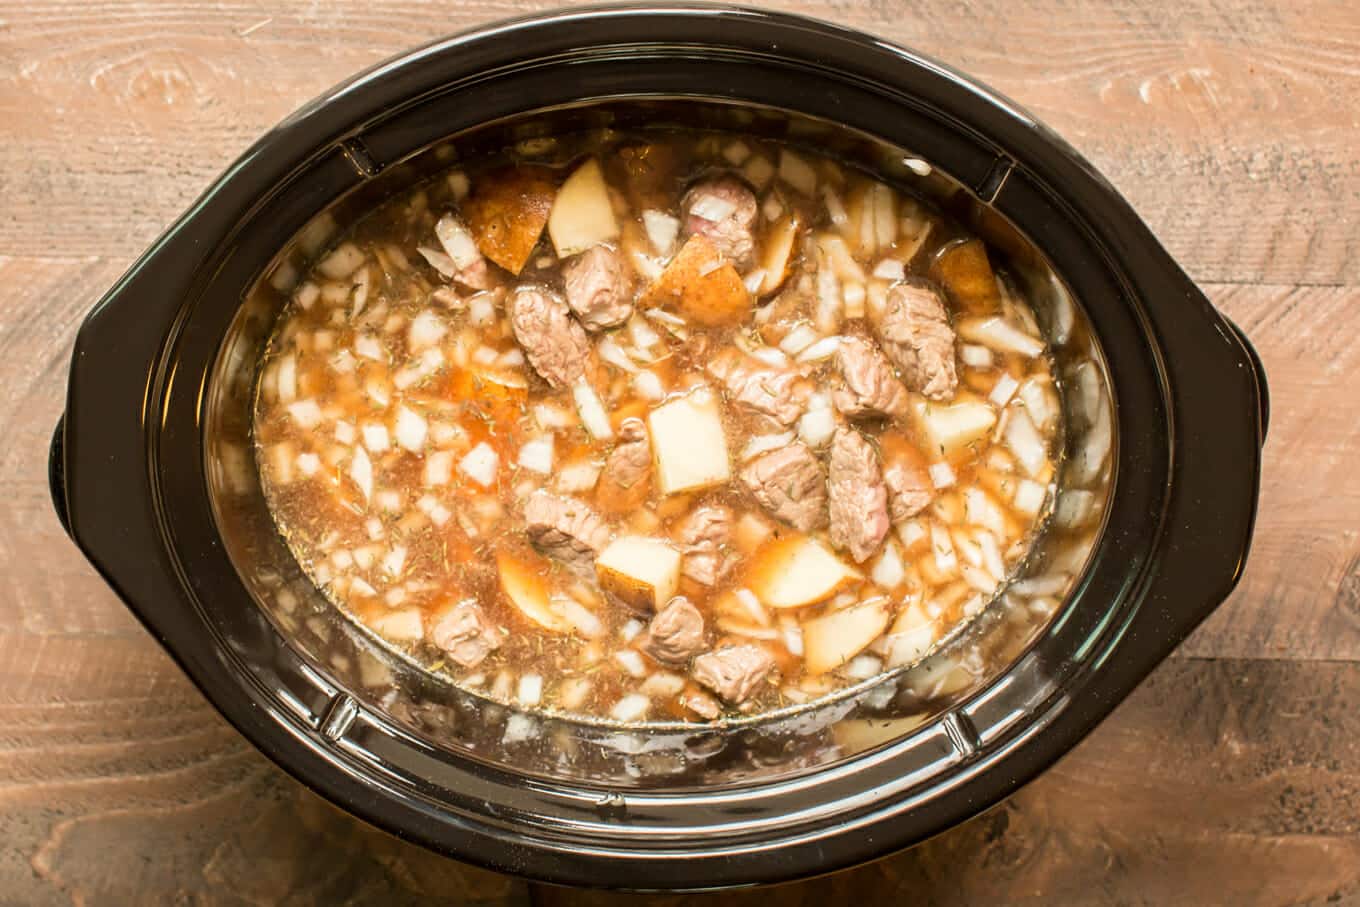 uncooked steak and potato soup in slow cooker